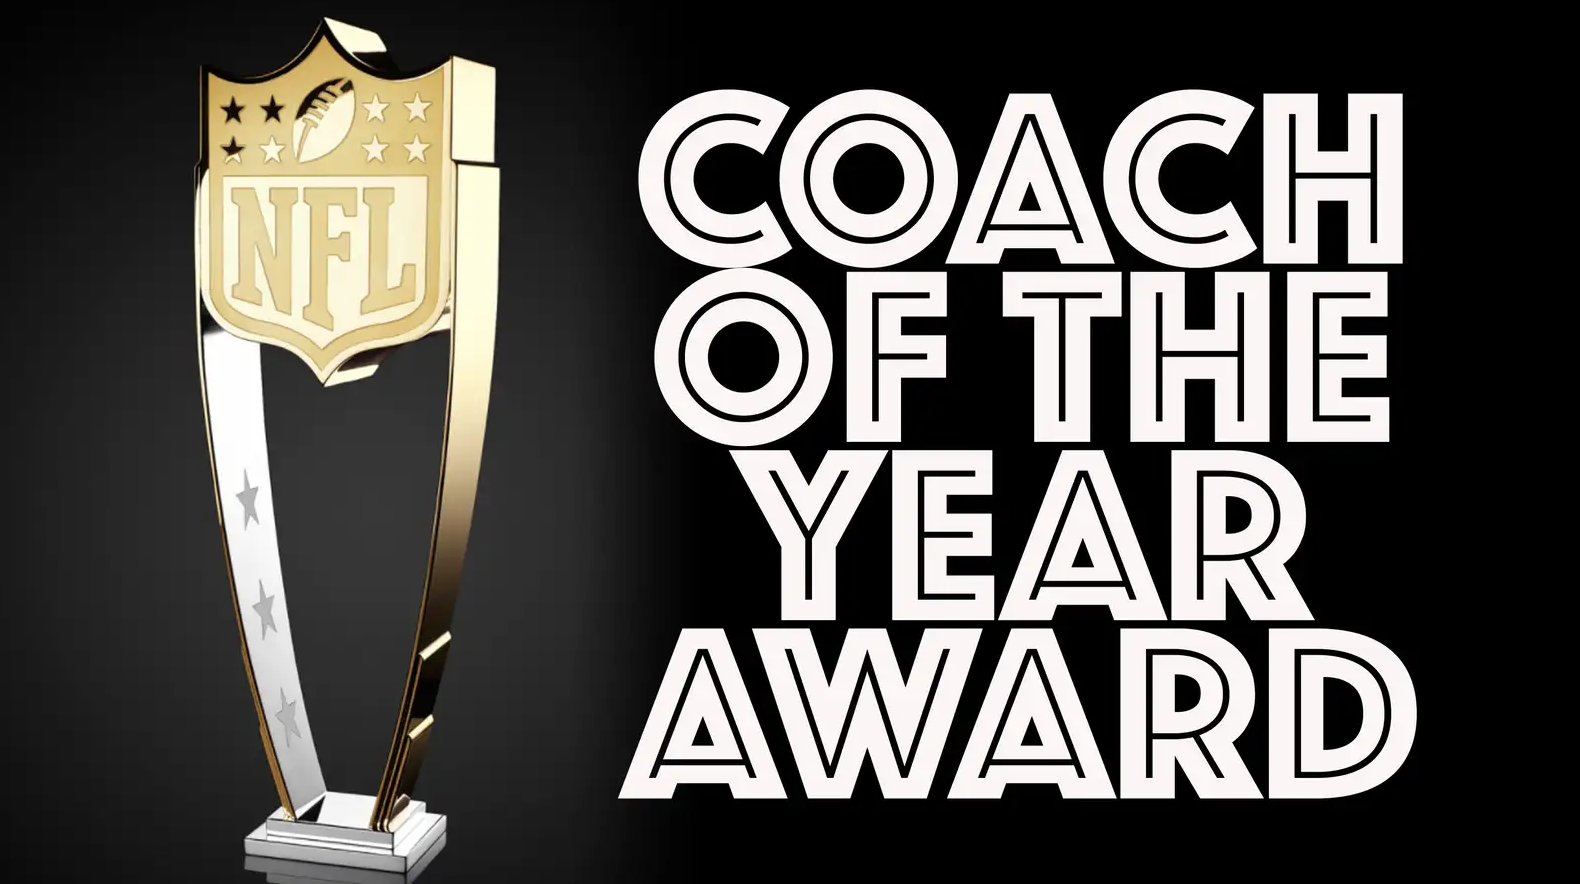 NFL Coach of the Year